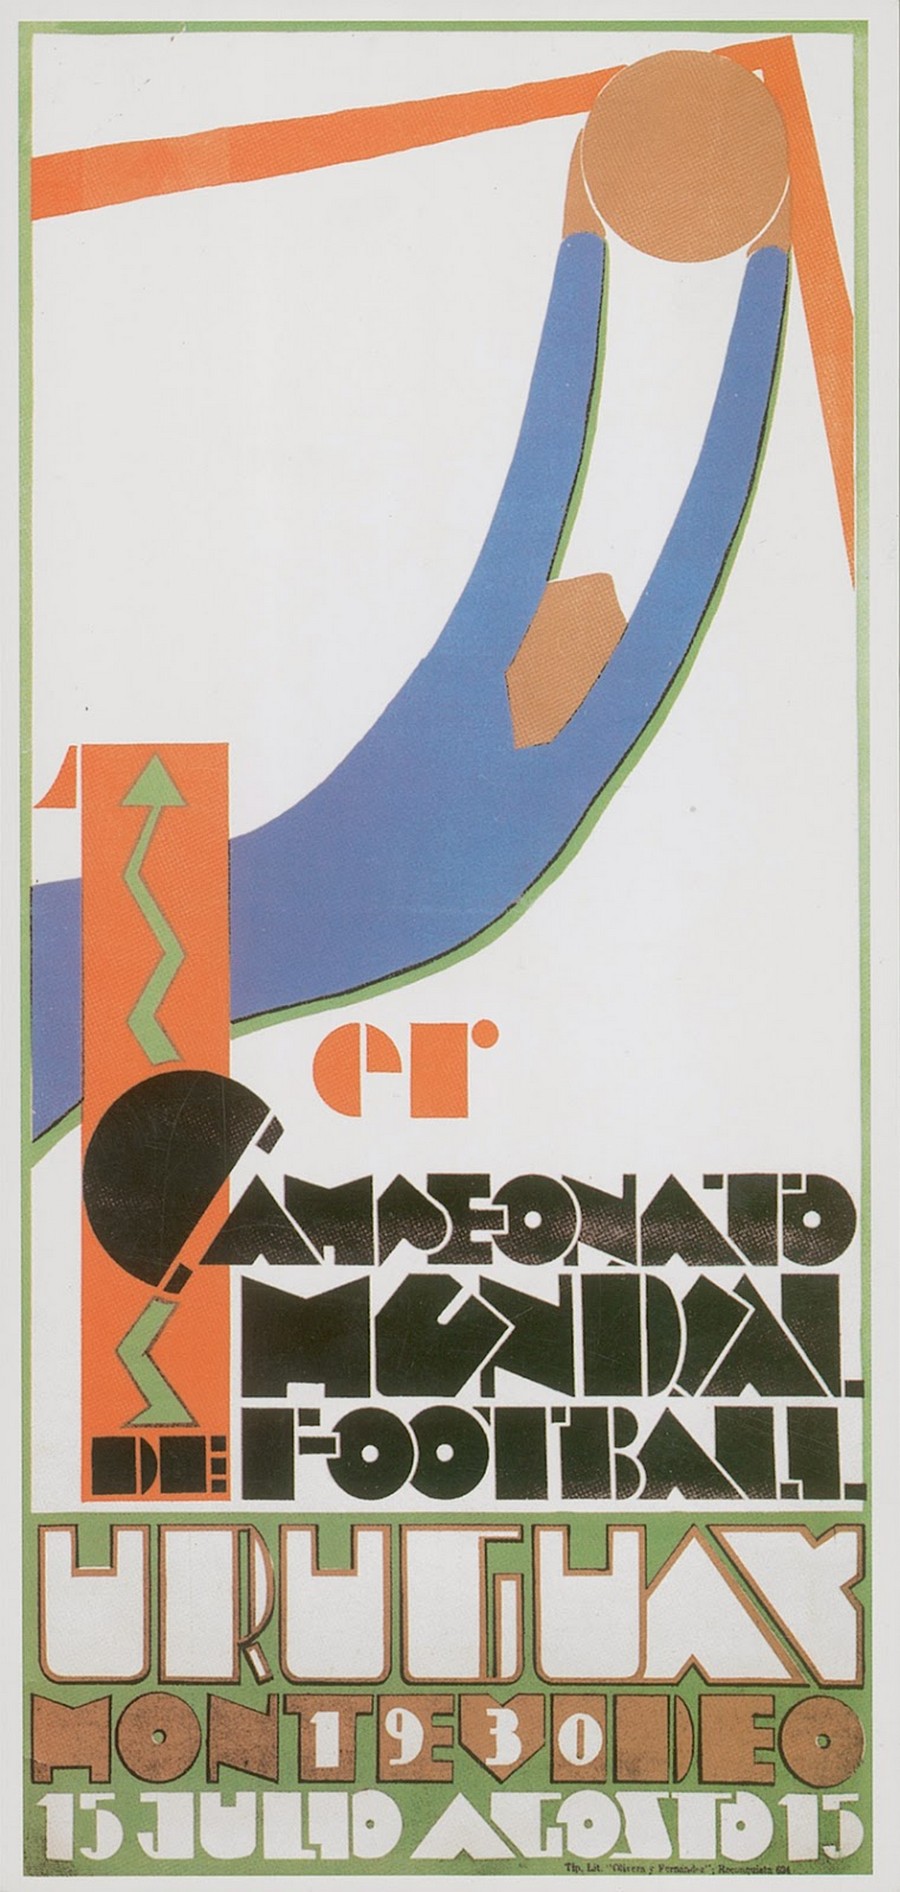 1930-Uruguay-Offical-World-Cup-Poster.jpg